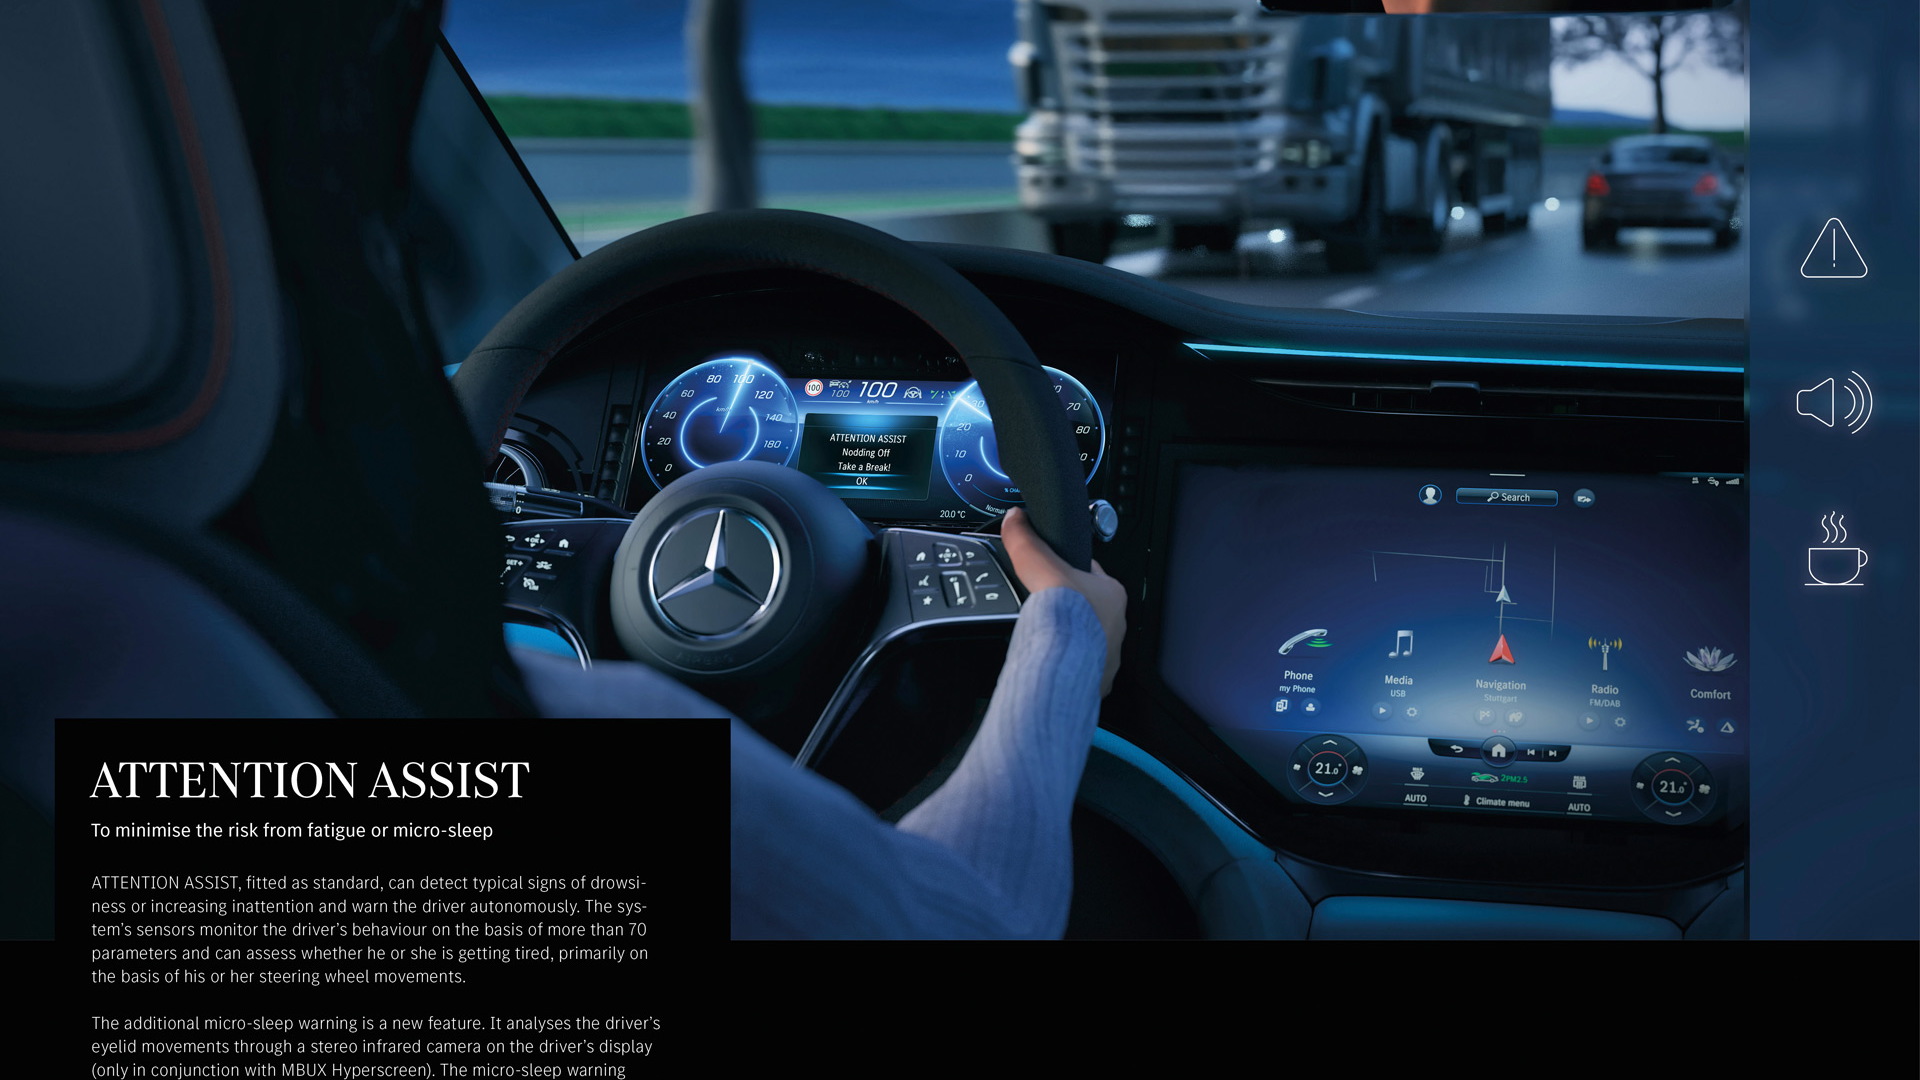 Mercedes-Benz safety systems